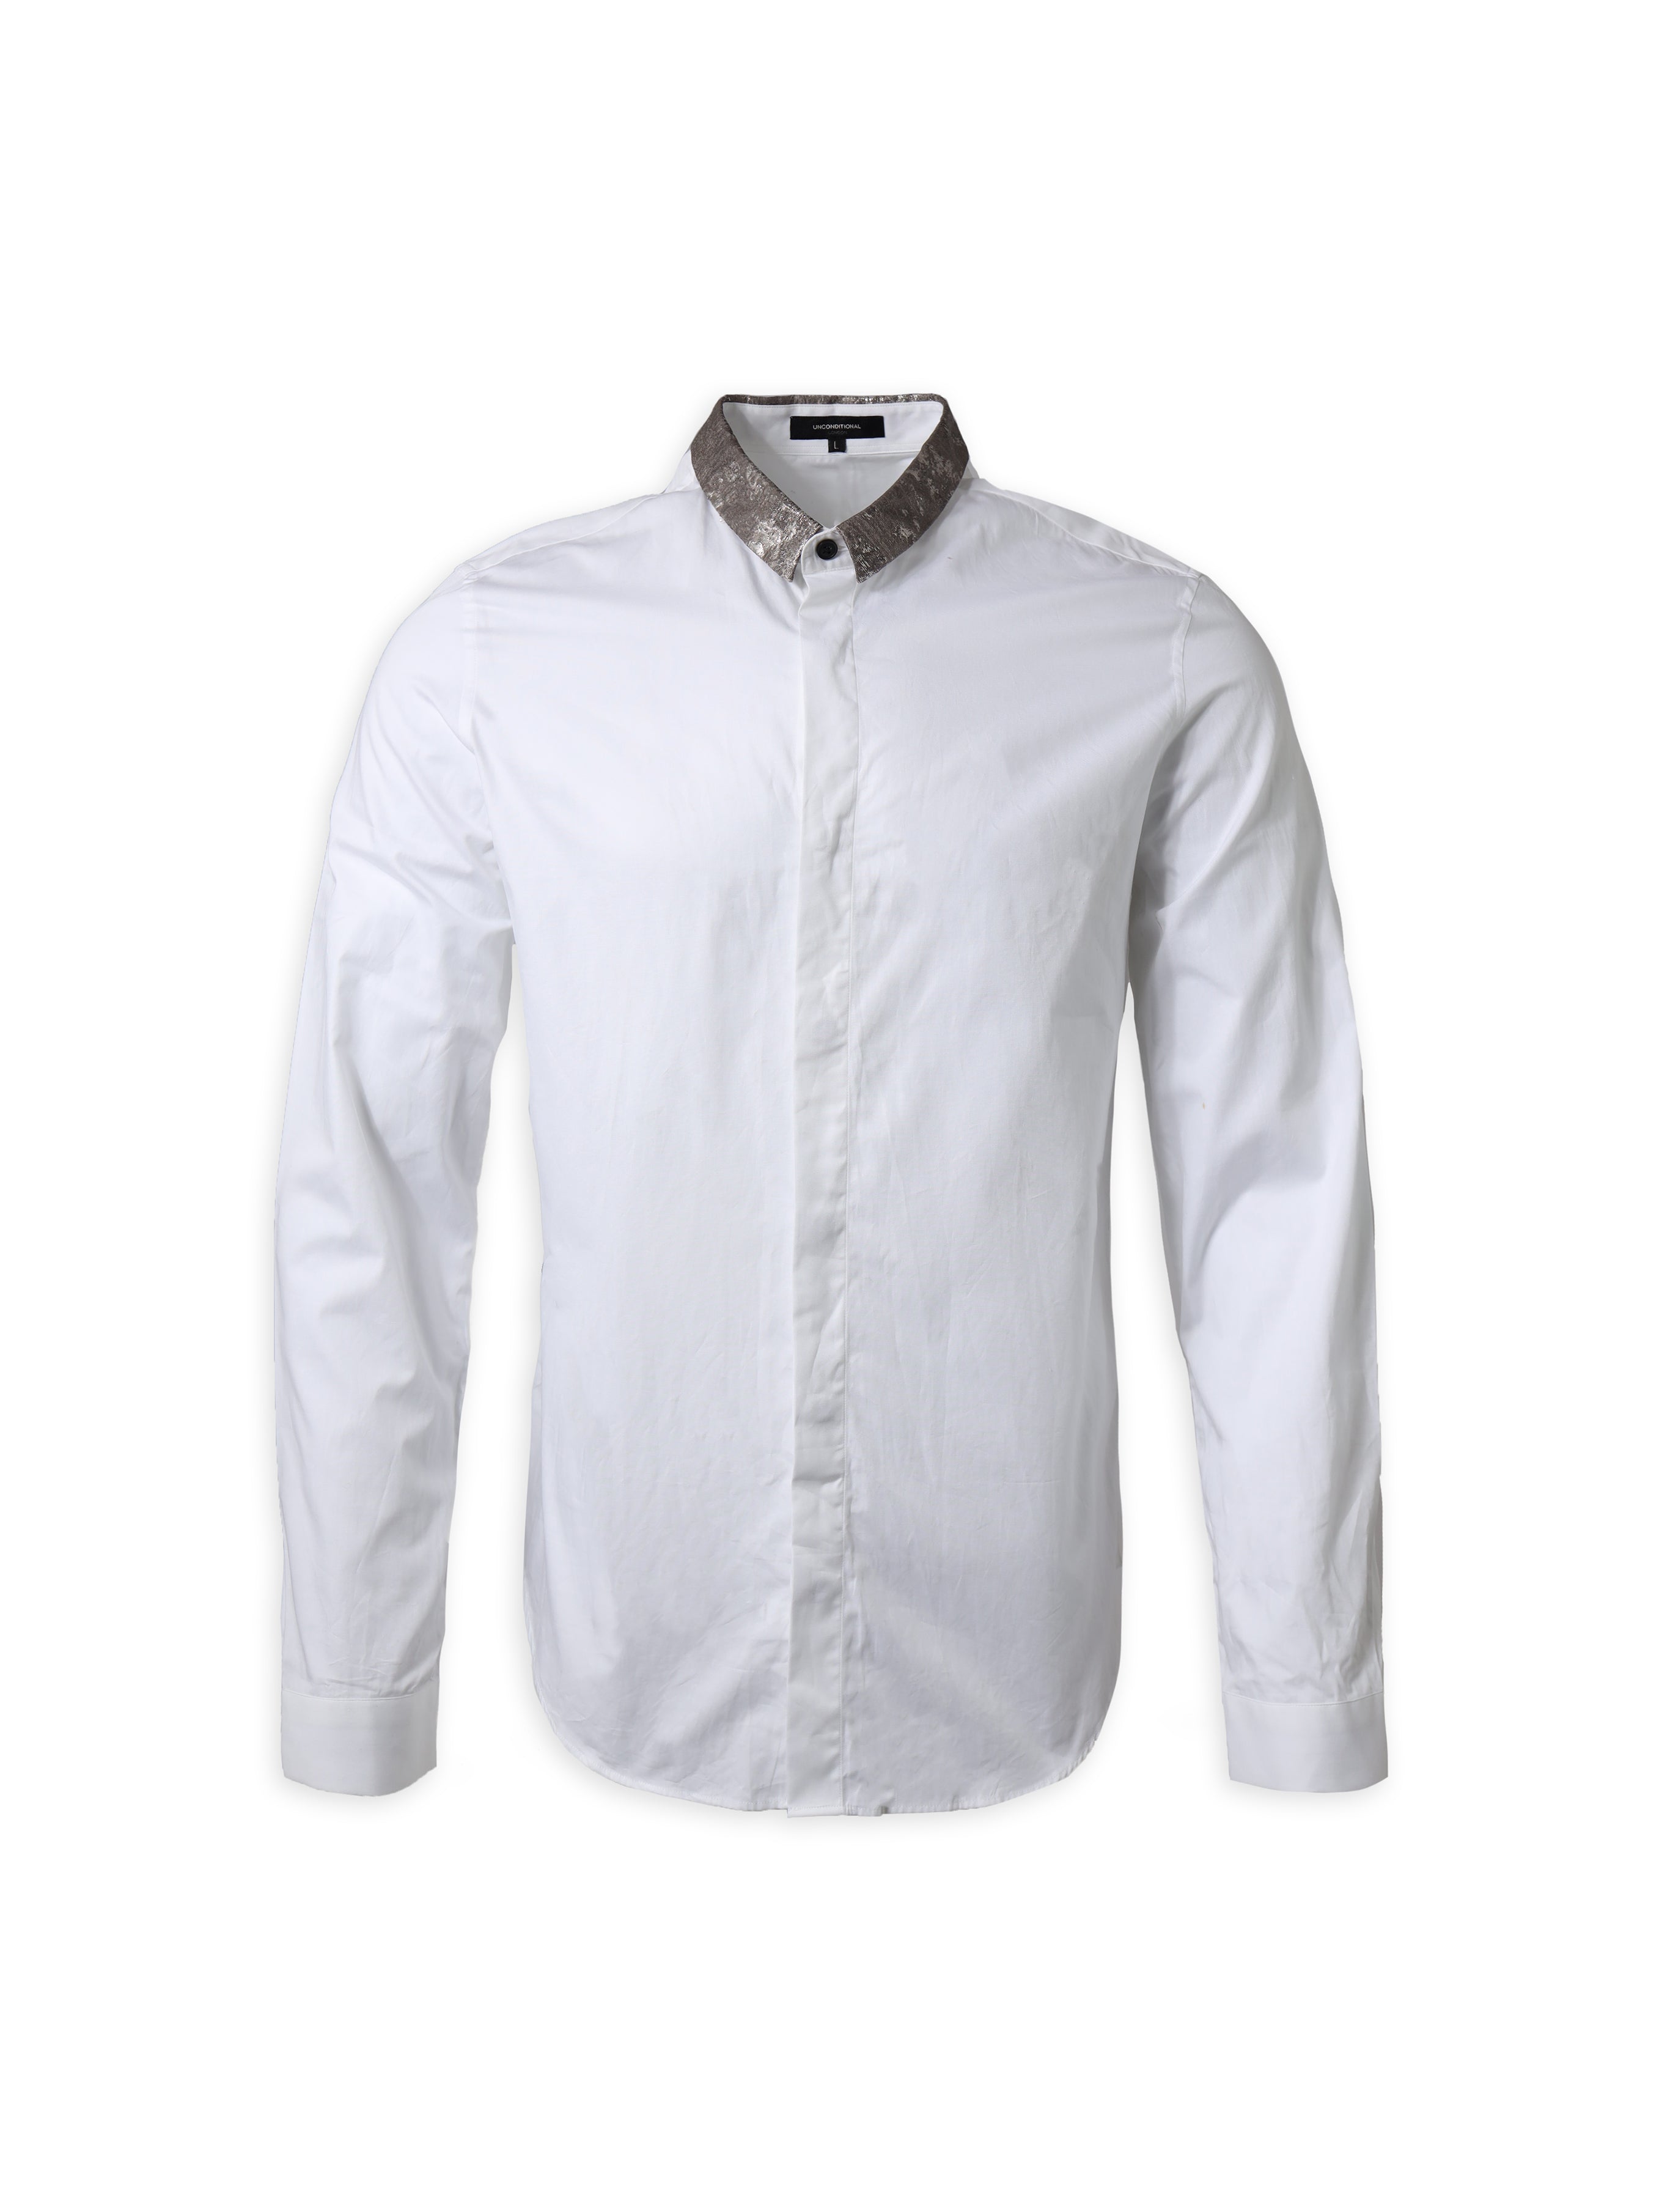 White Long Sleeved Shirt With Silver Collar